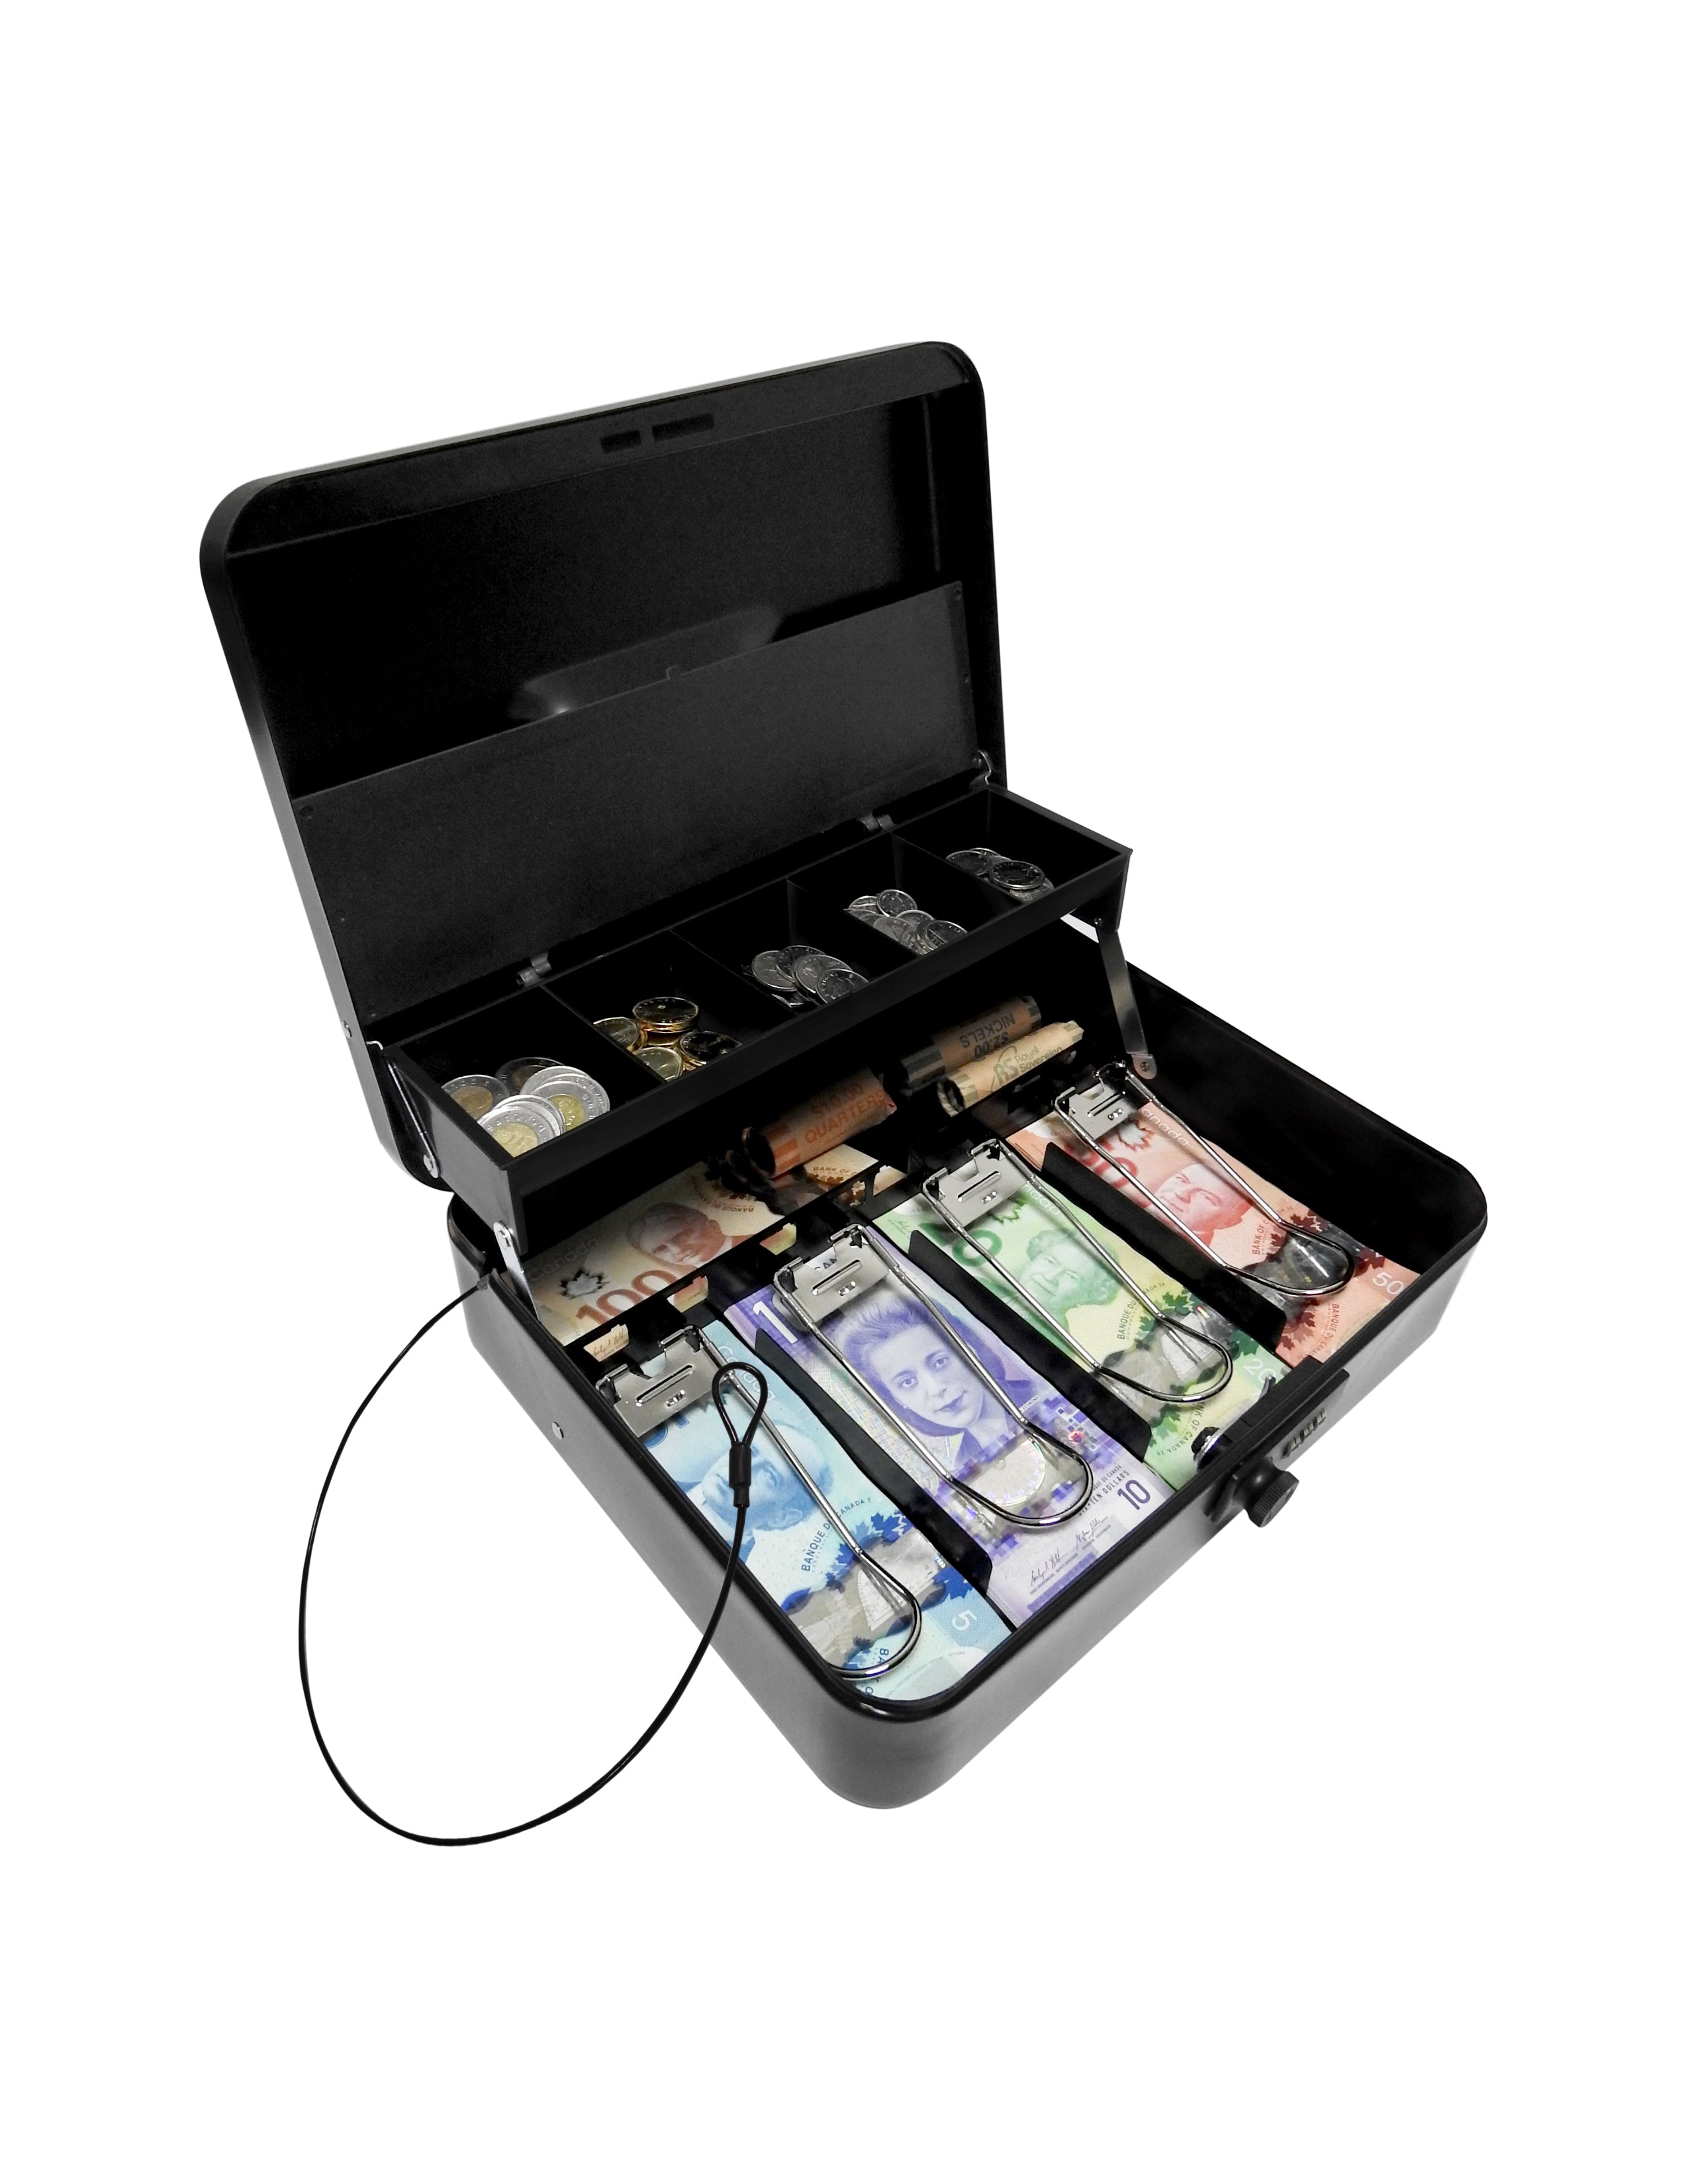 MCBC-2200/ TIERED TRAY DELUXE COMBINATION  CASH BOX